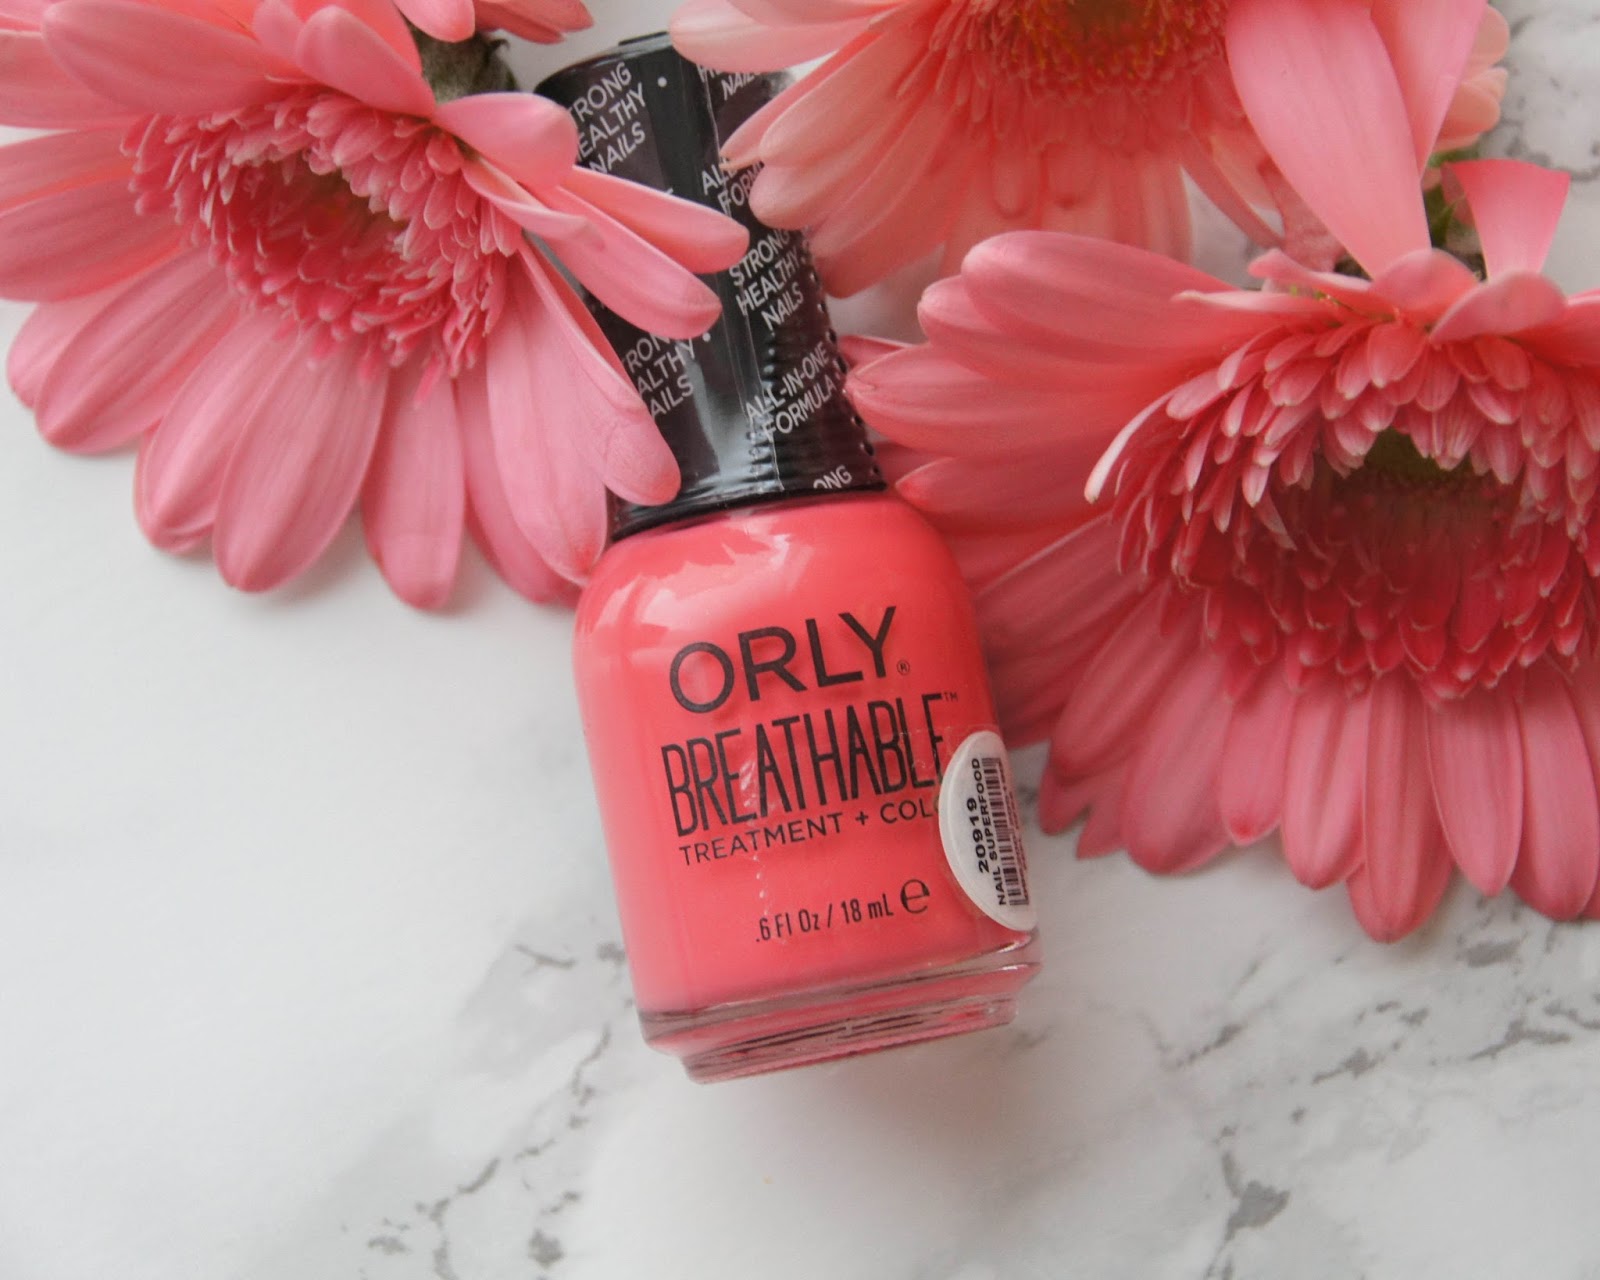 8. Orly Breathable Treatment + Color Nail Polish with Antifungal Formula - wide 3